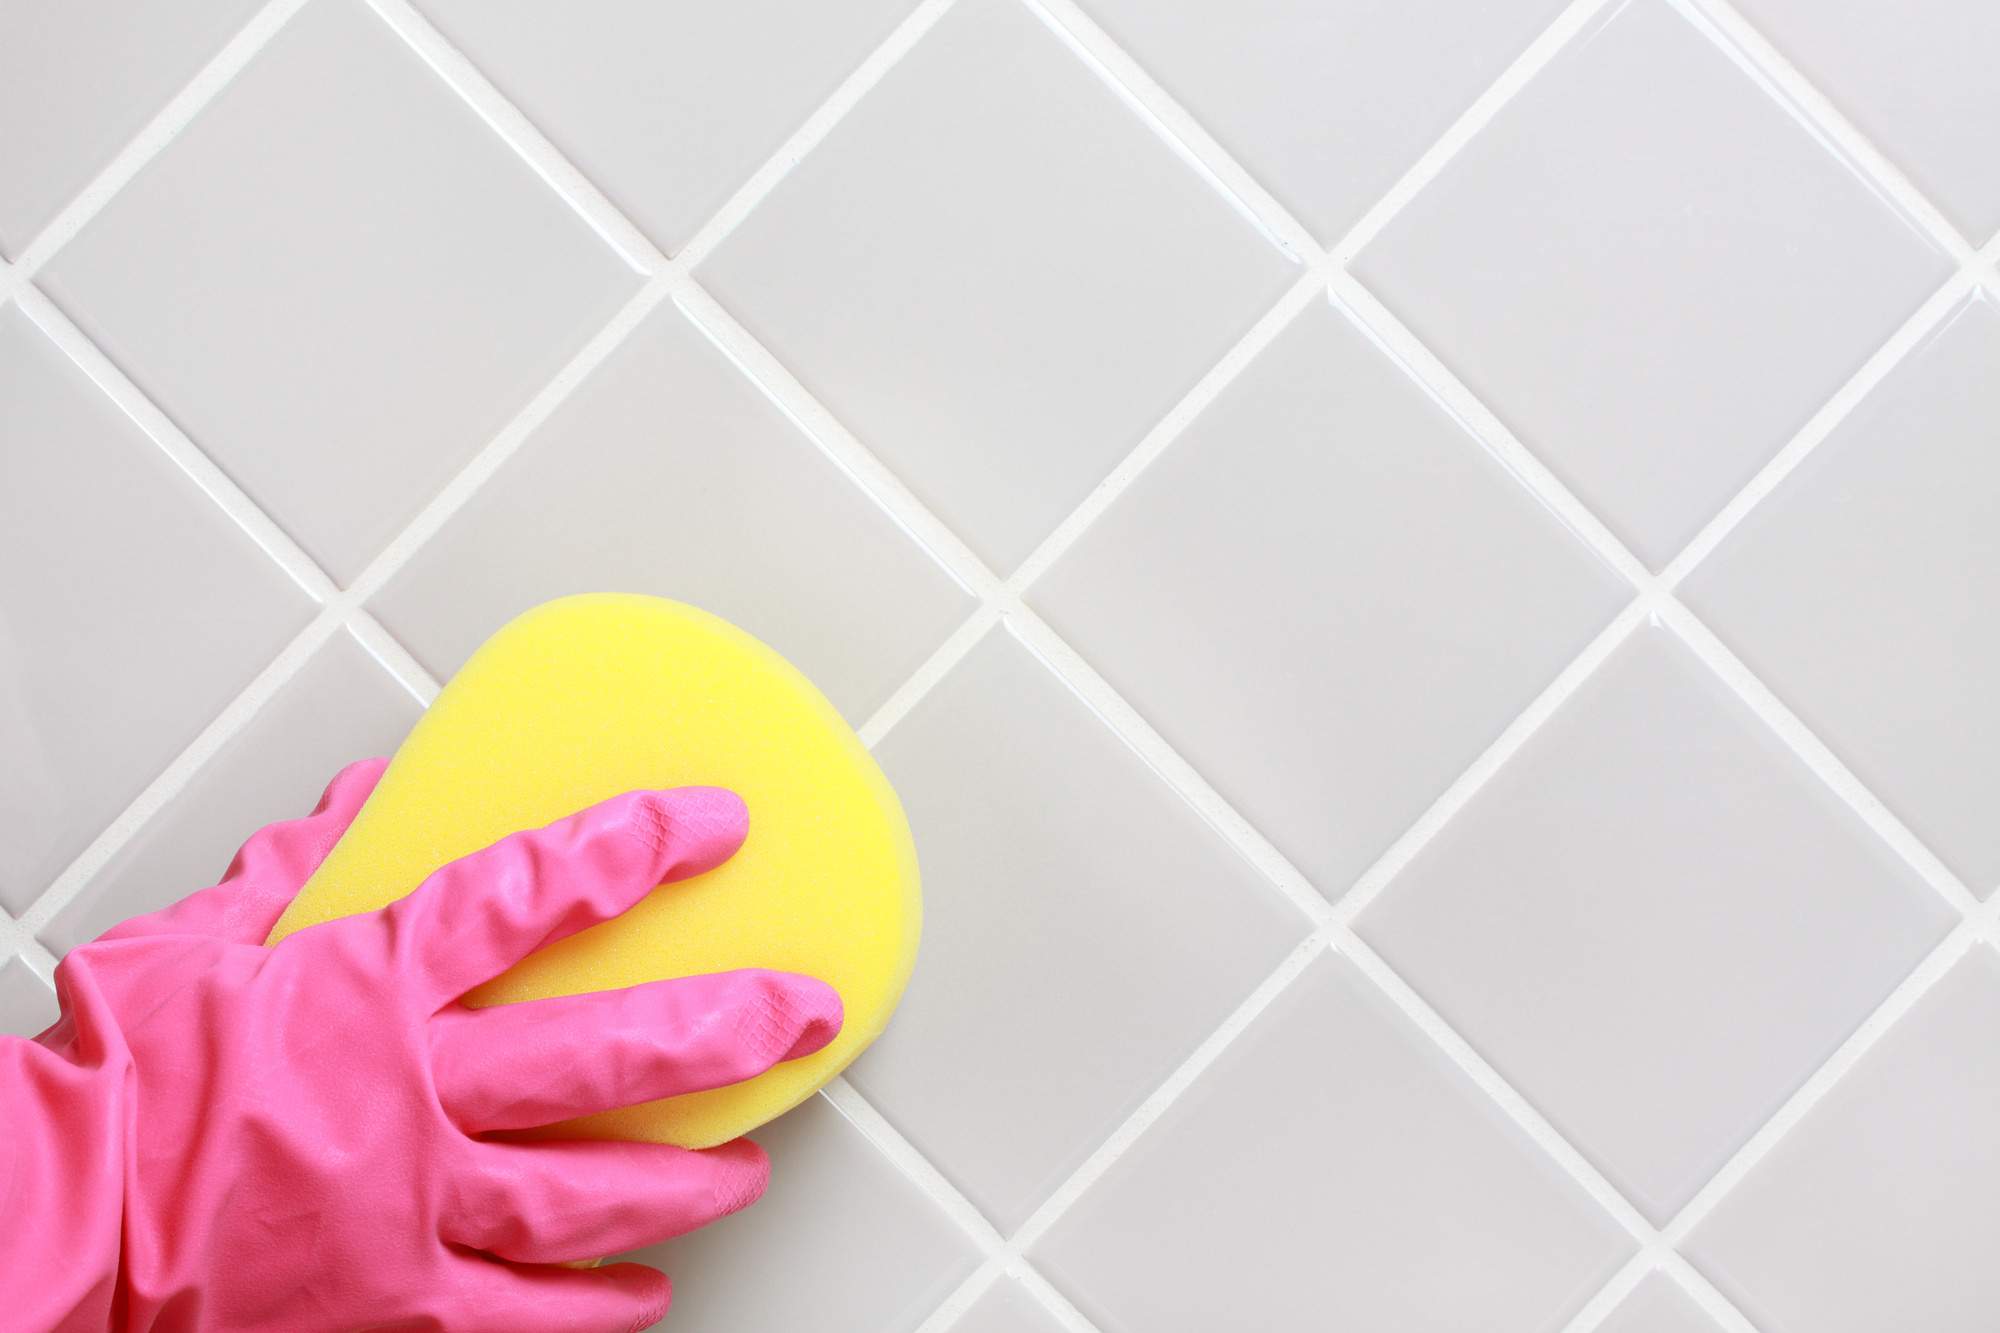 Tile and Grout Cleaning Company Near Me: Choosing a Cleaning Service